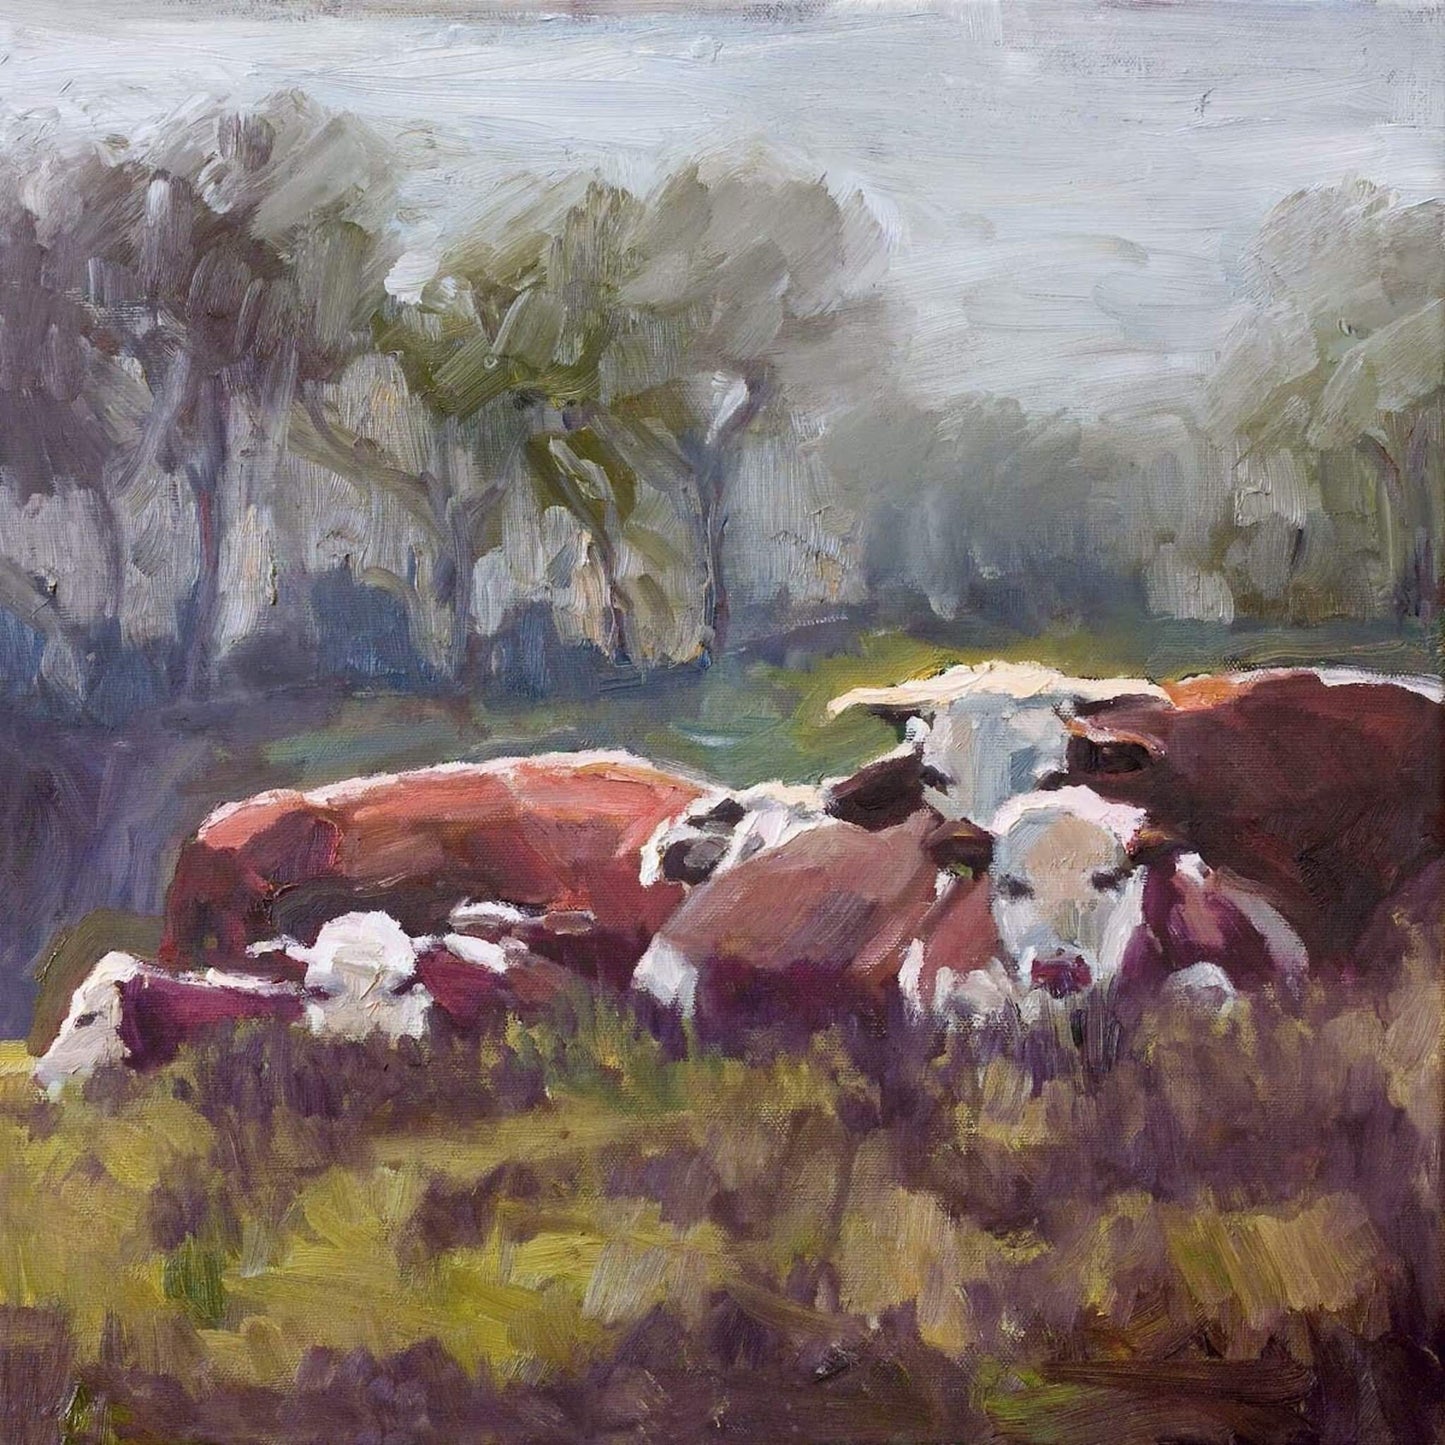 Five Cows Glossy Poster Print